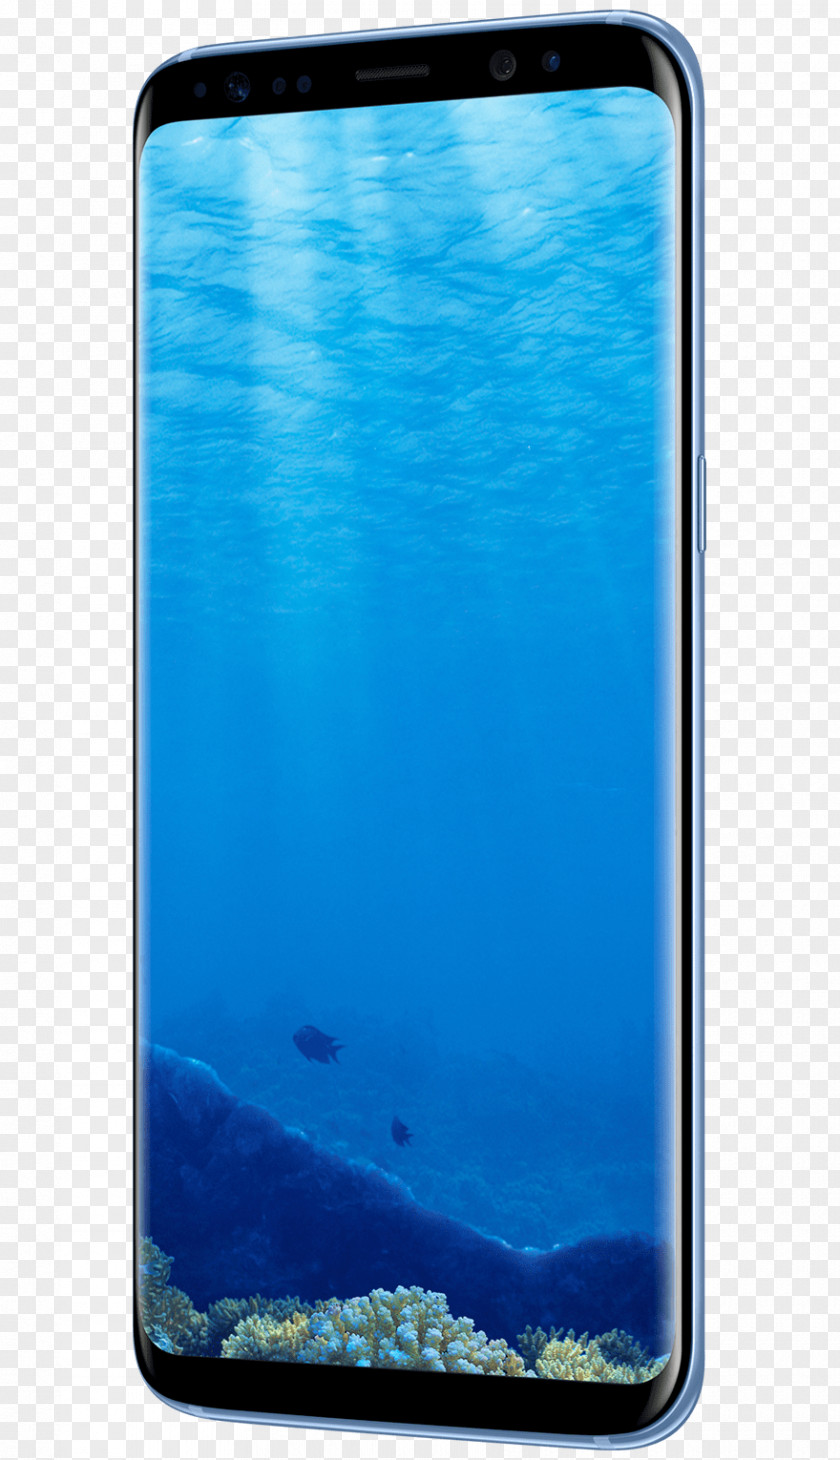 Samsung Galaxy S8+ S8 Plus (64GB, Coral Blue) 64 Gb Group PNG